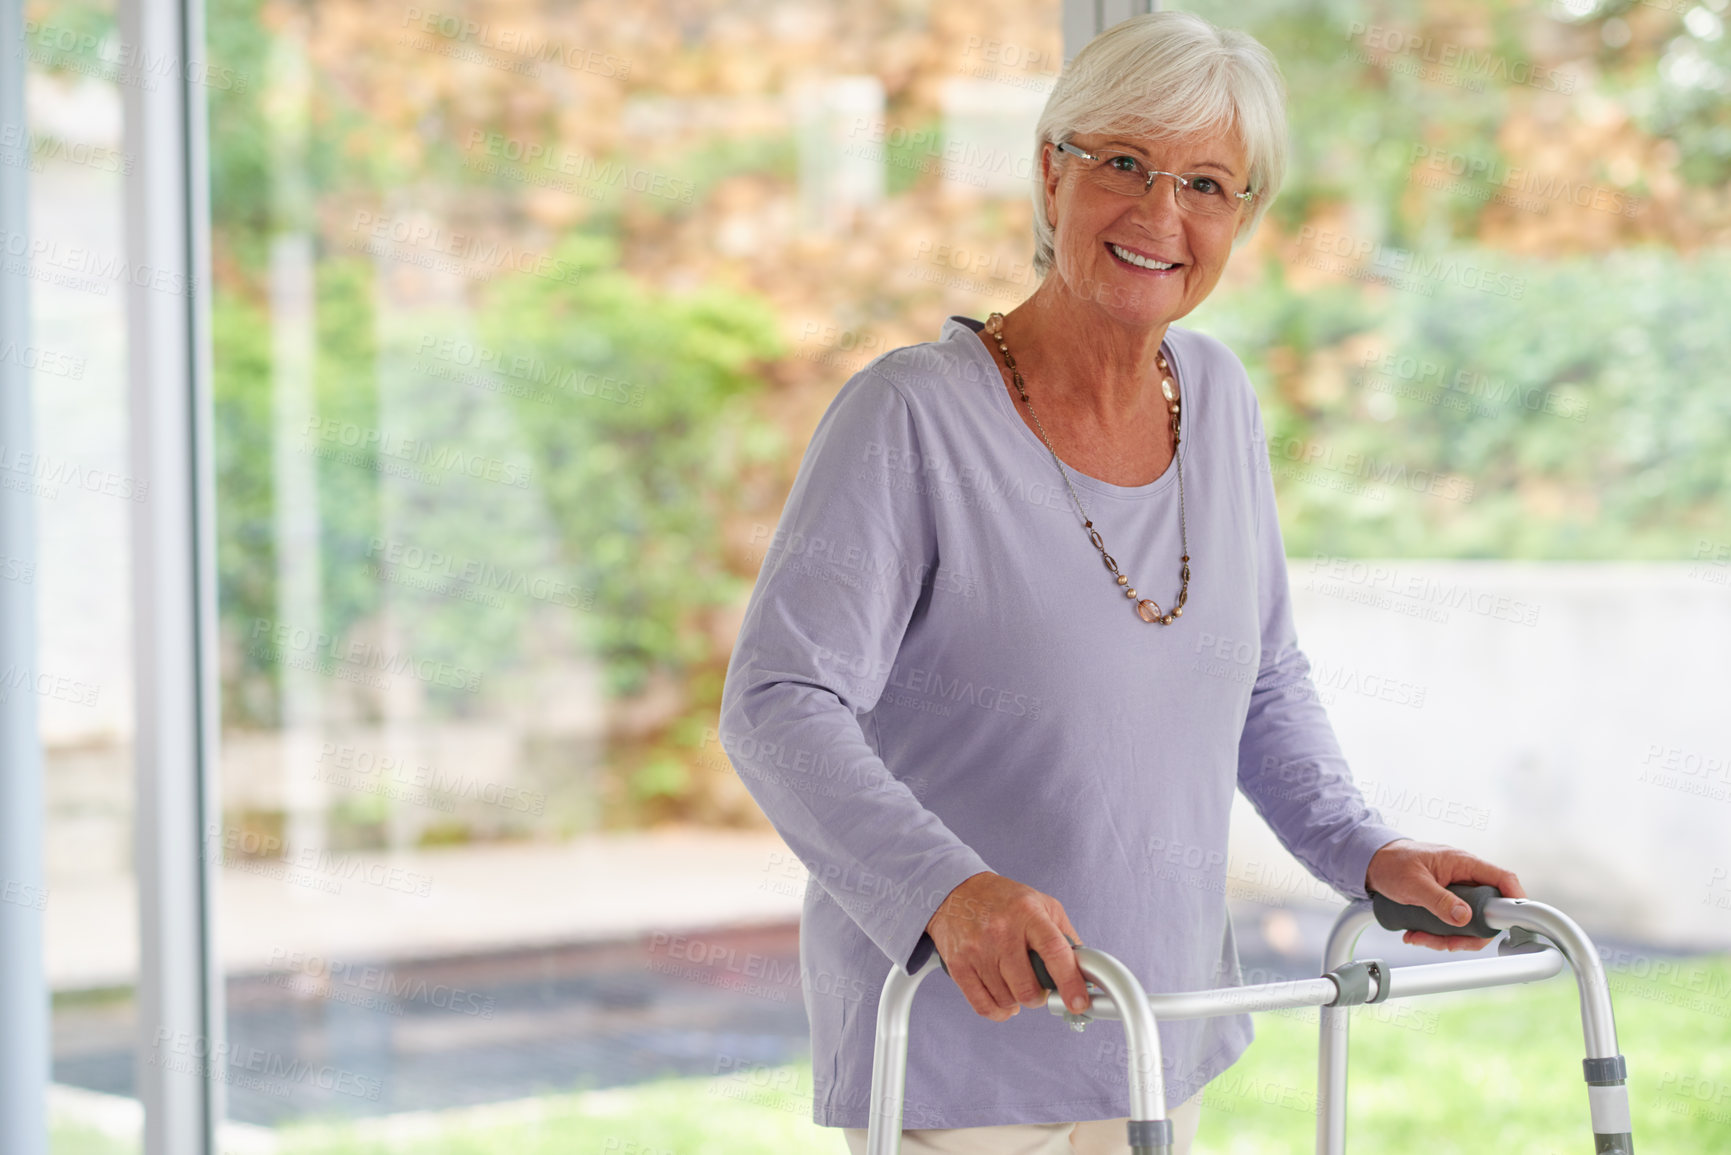 Buy stock photo Portrait shot of a senior woman using an orthopedic walker, looking positive